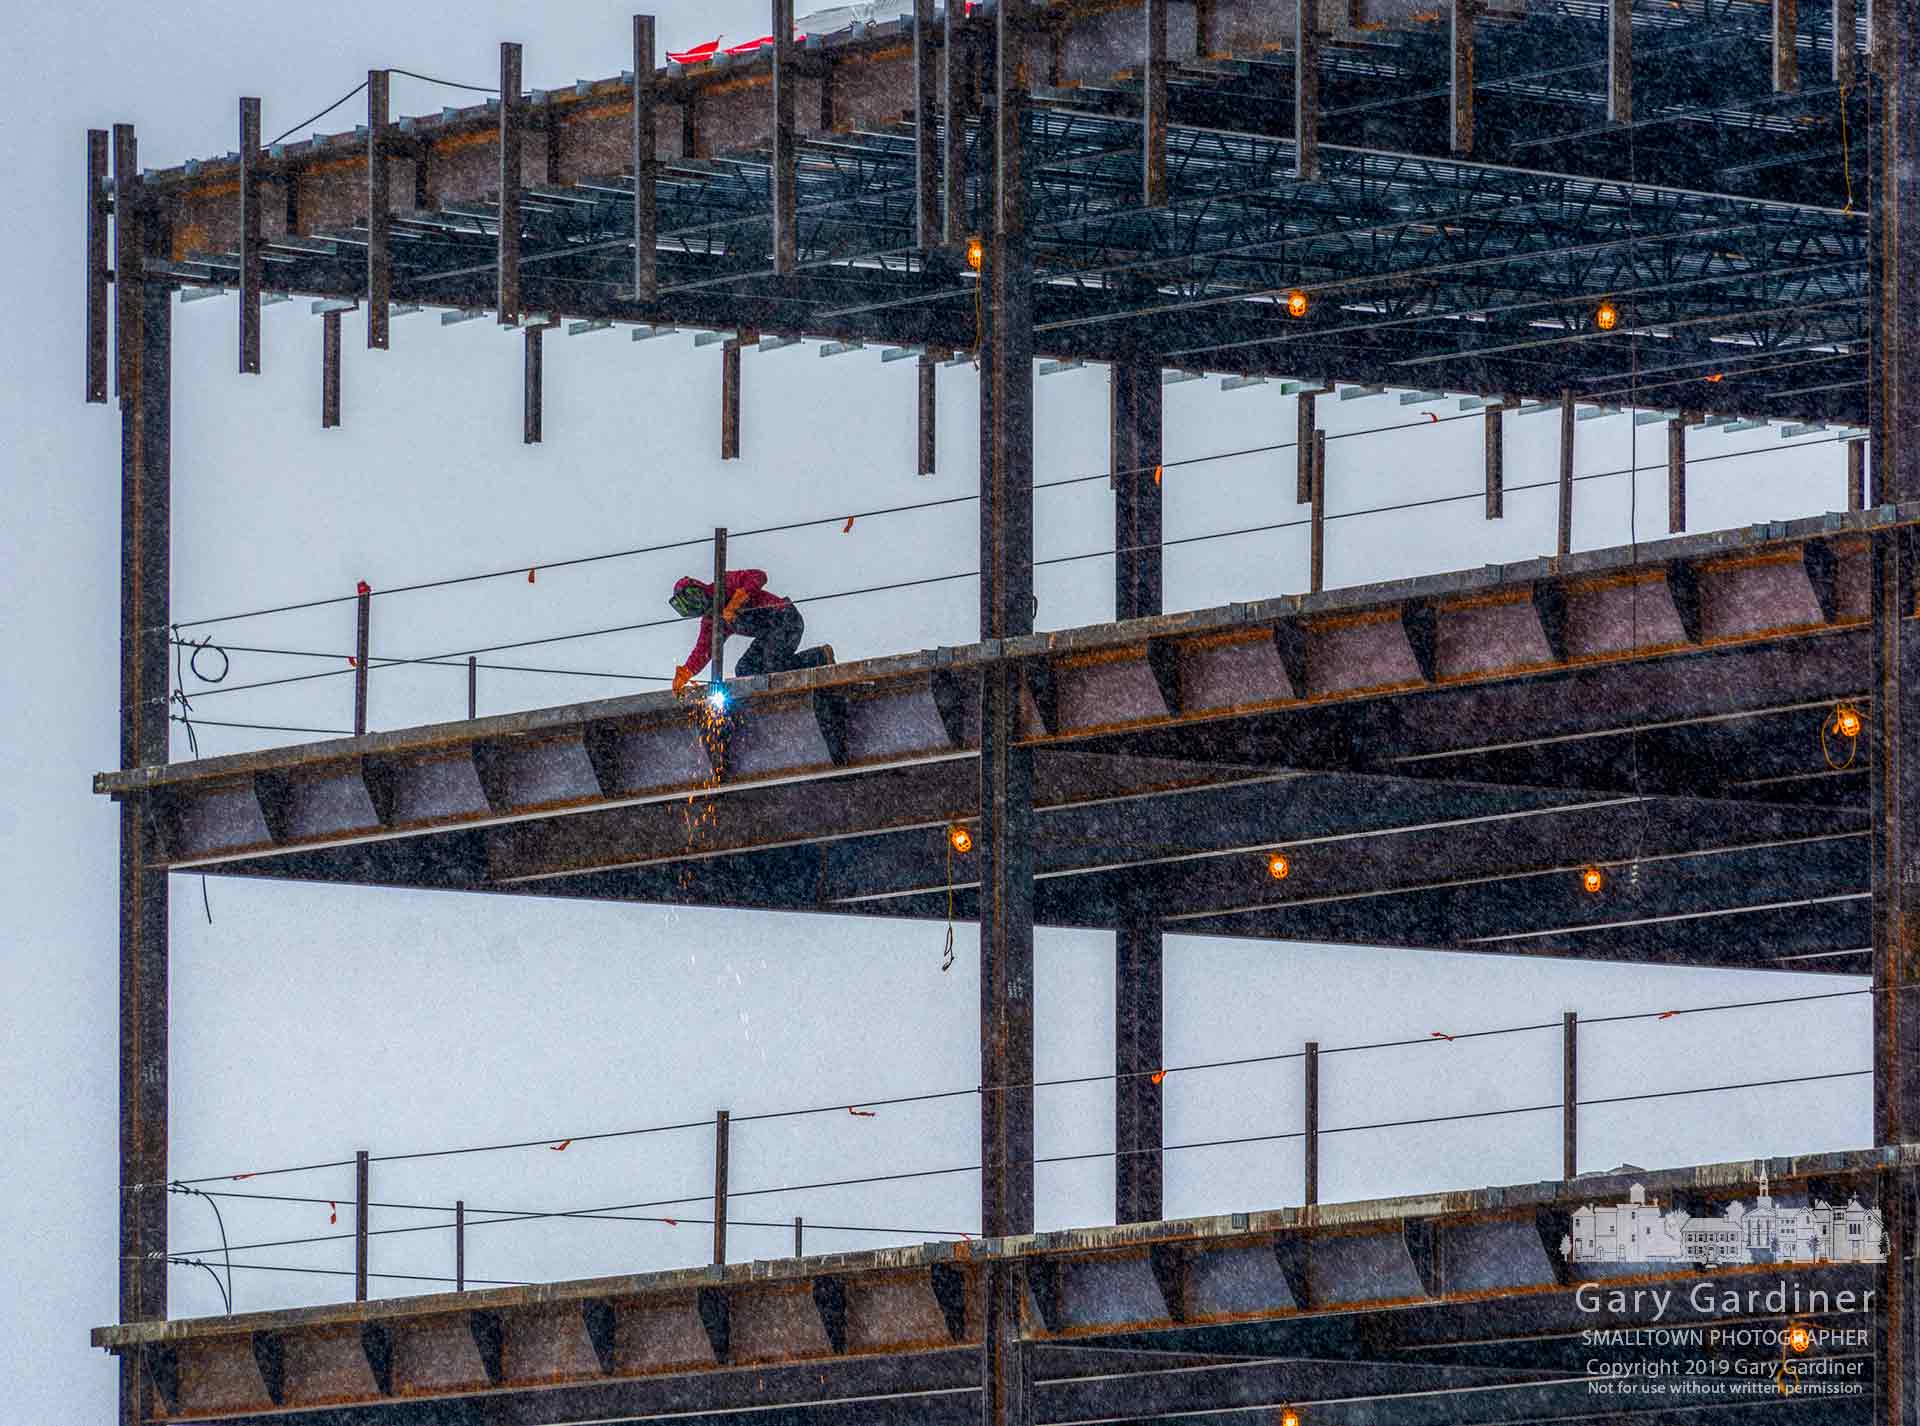 A welder ignores the early morning snow as he anchors mounts for siding on the floor levels of the DHL building being built in the Westar center. My Final Photo for Jan. 17, 2019.